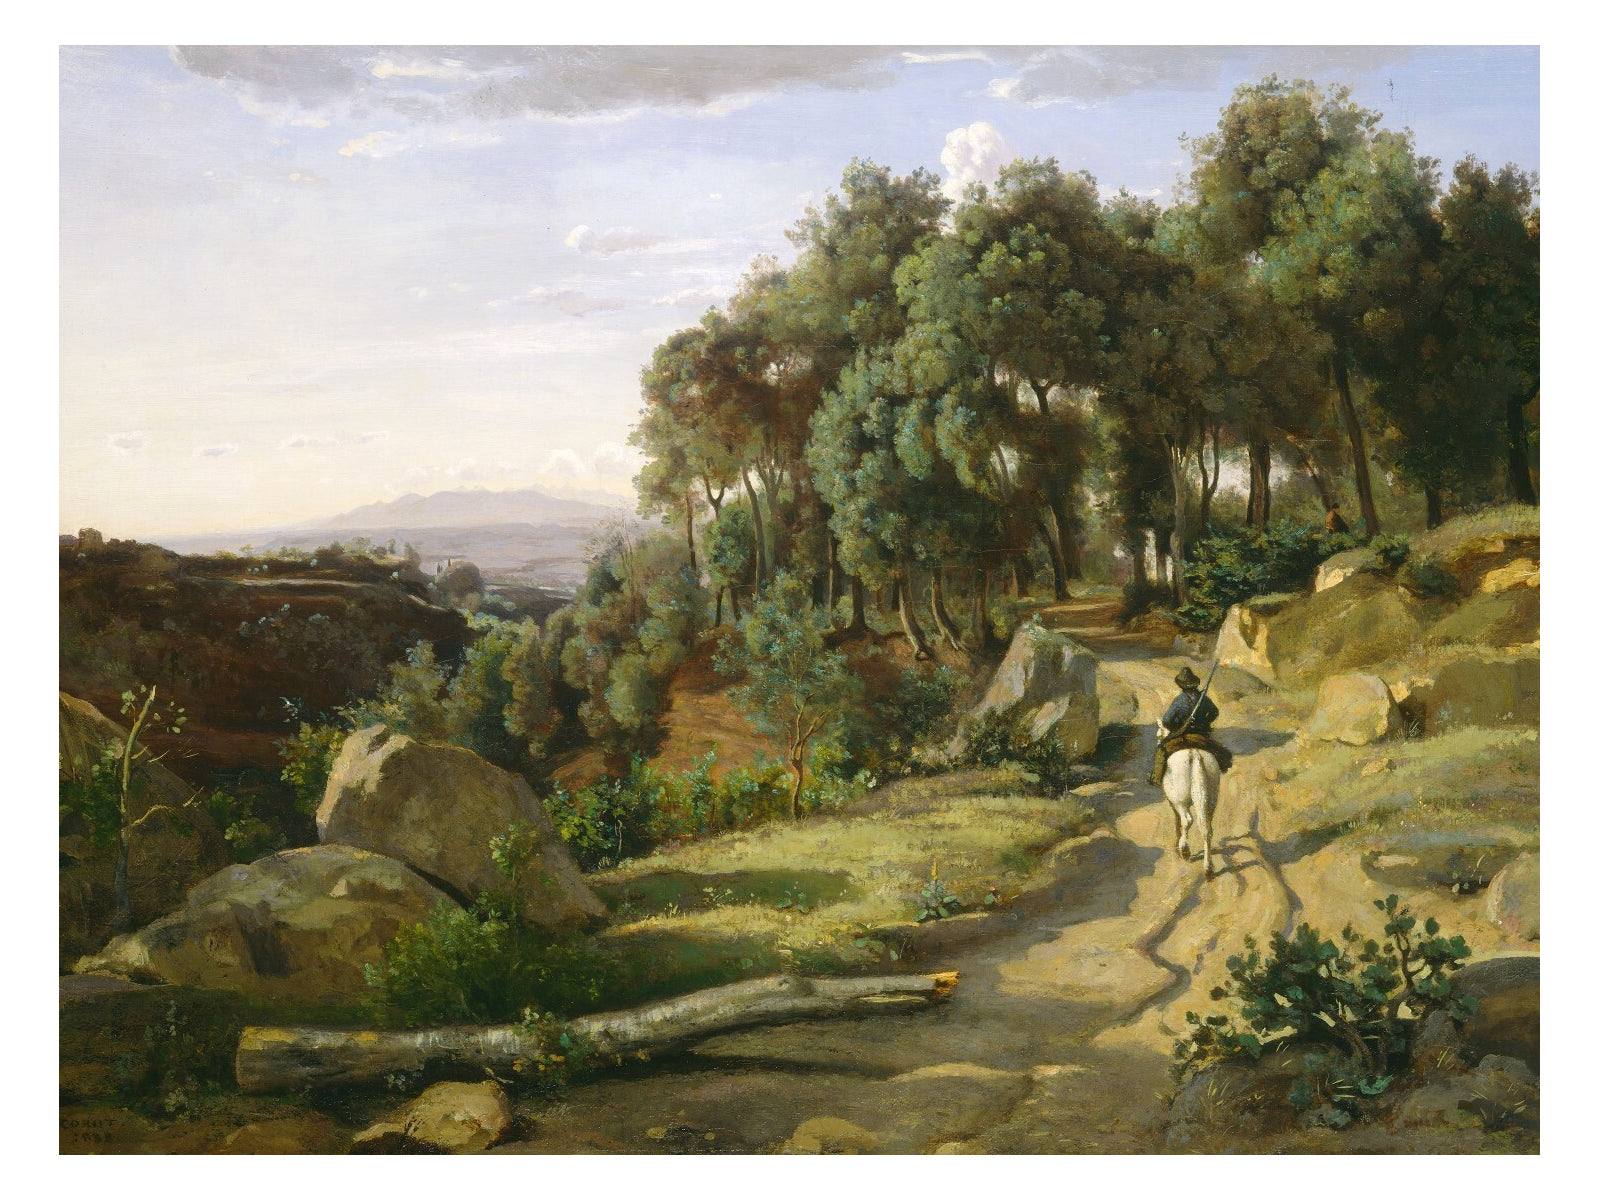 Jean-Baptiste-Camille Corot's oil painting A View near Volterra